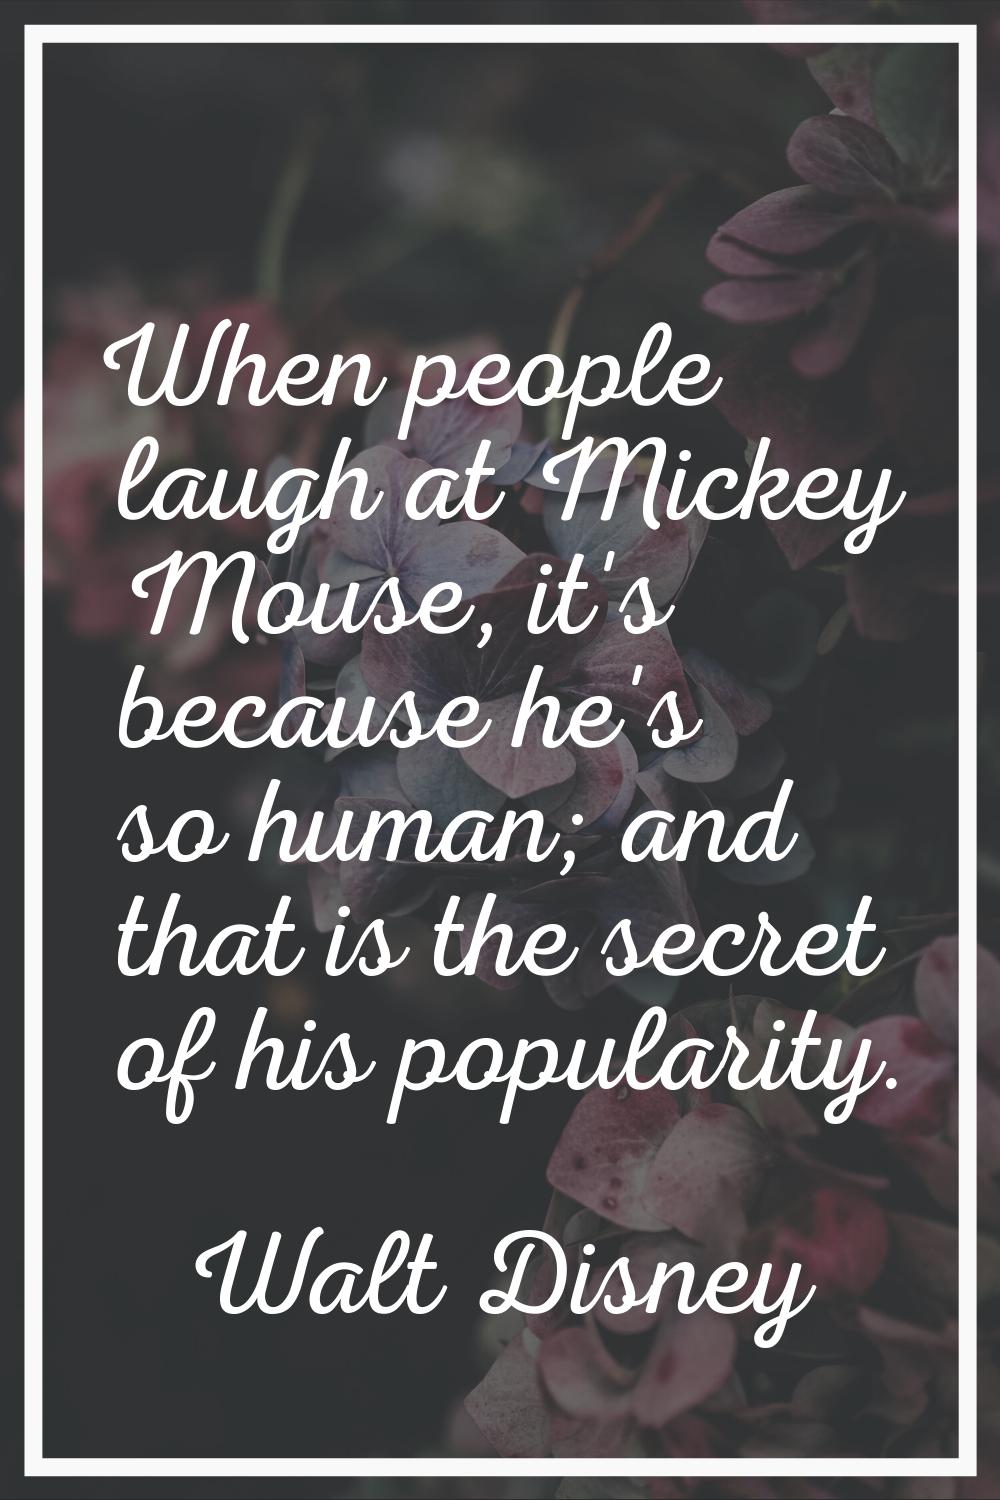 When people laugh at Mickey Mouse, it's because he's so human; and that is the secret of his popula